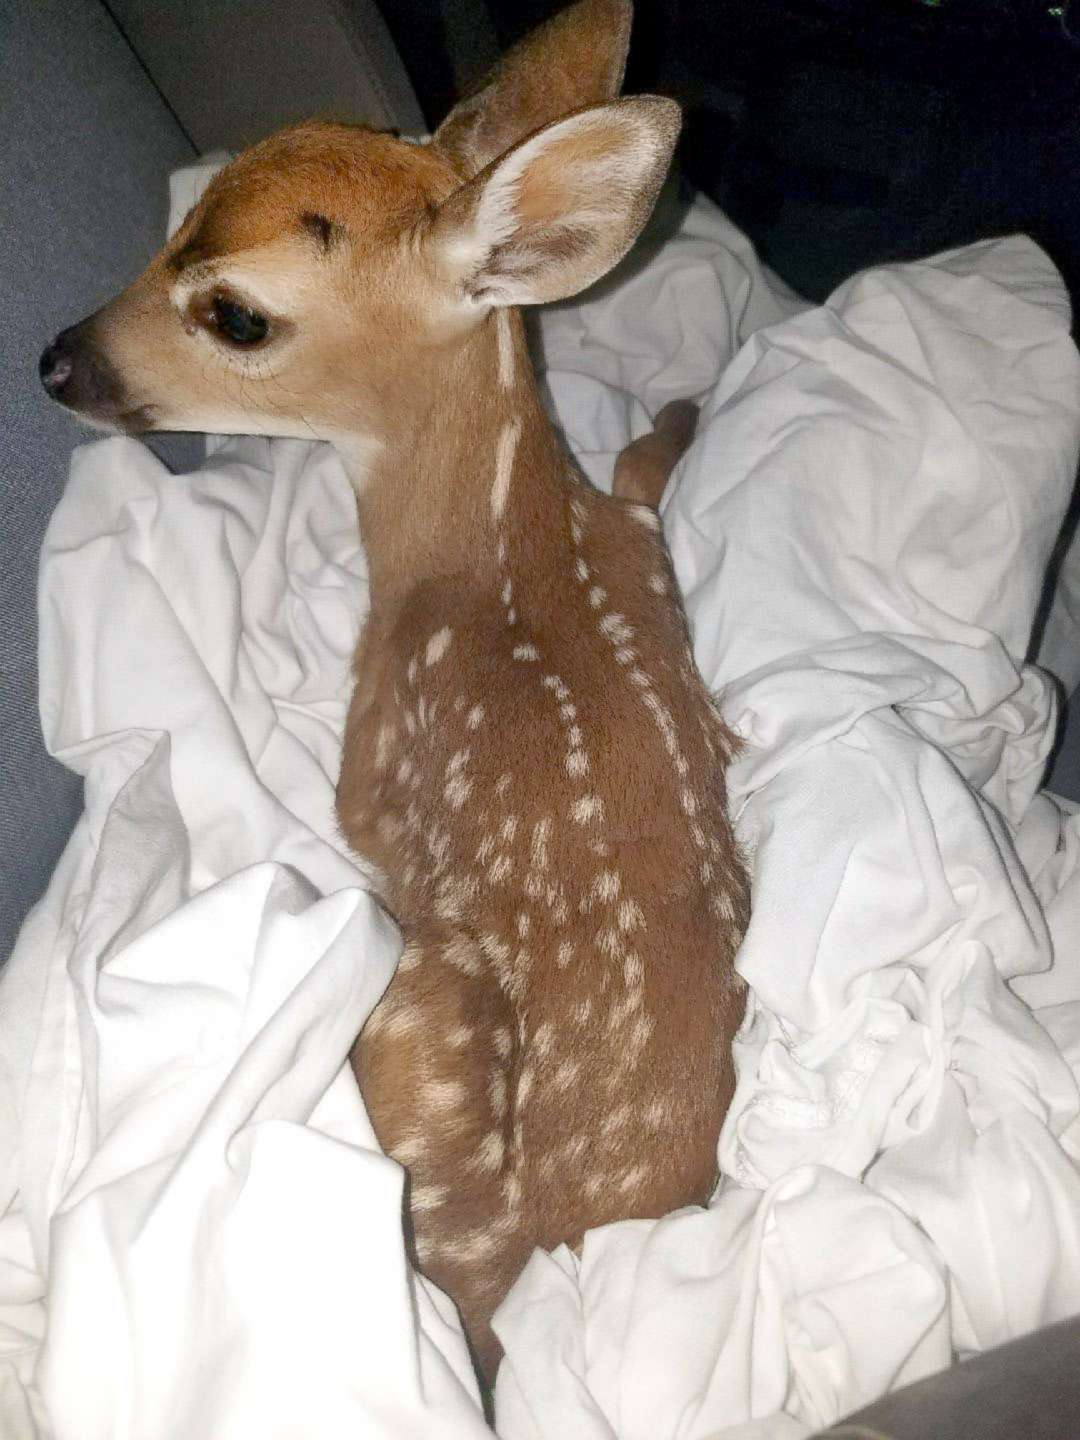 PHOTO: Monroe County Fire Rescue firefighter, Jen Shockley, responded to the Big Pine Key brush fire, April 22, 2018 and rescued an endangered Key deer fawn.